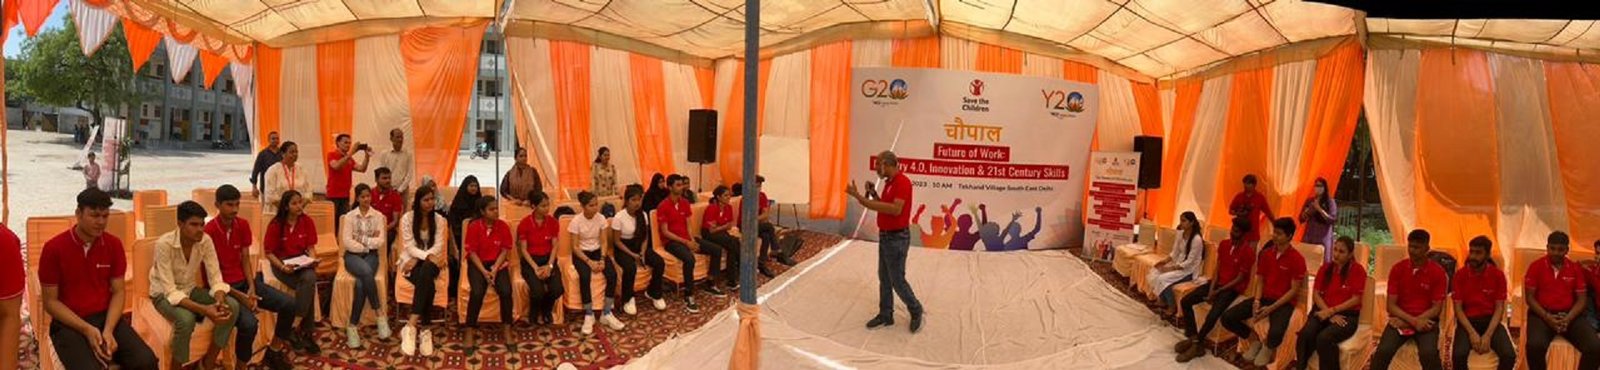 Youth Chaupal: Bringing Forward the Voice of Youth in the Build-up to G20 - Save the Children